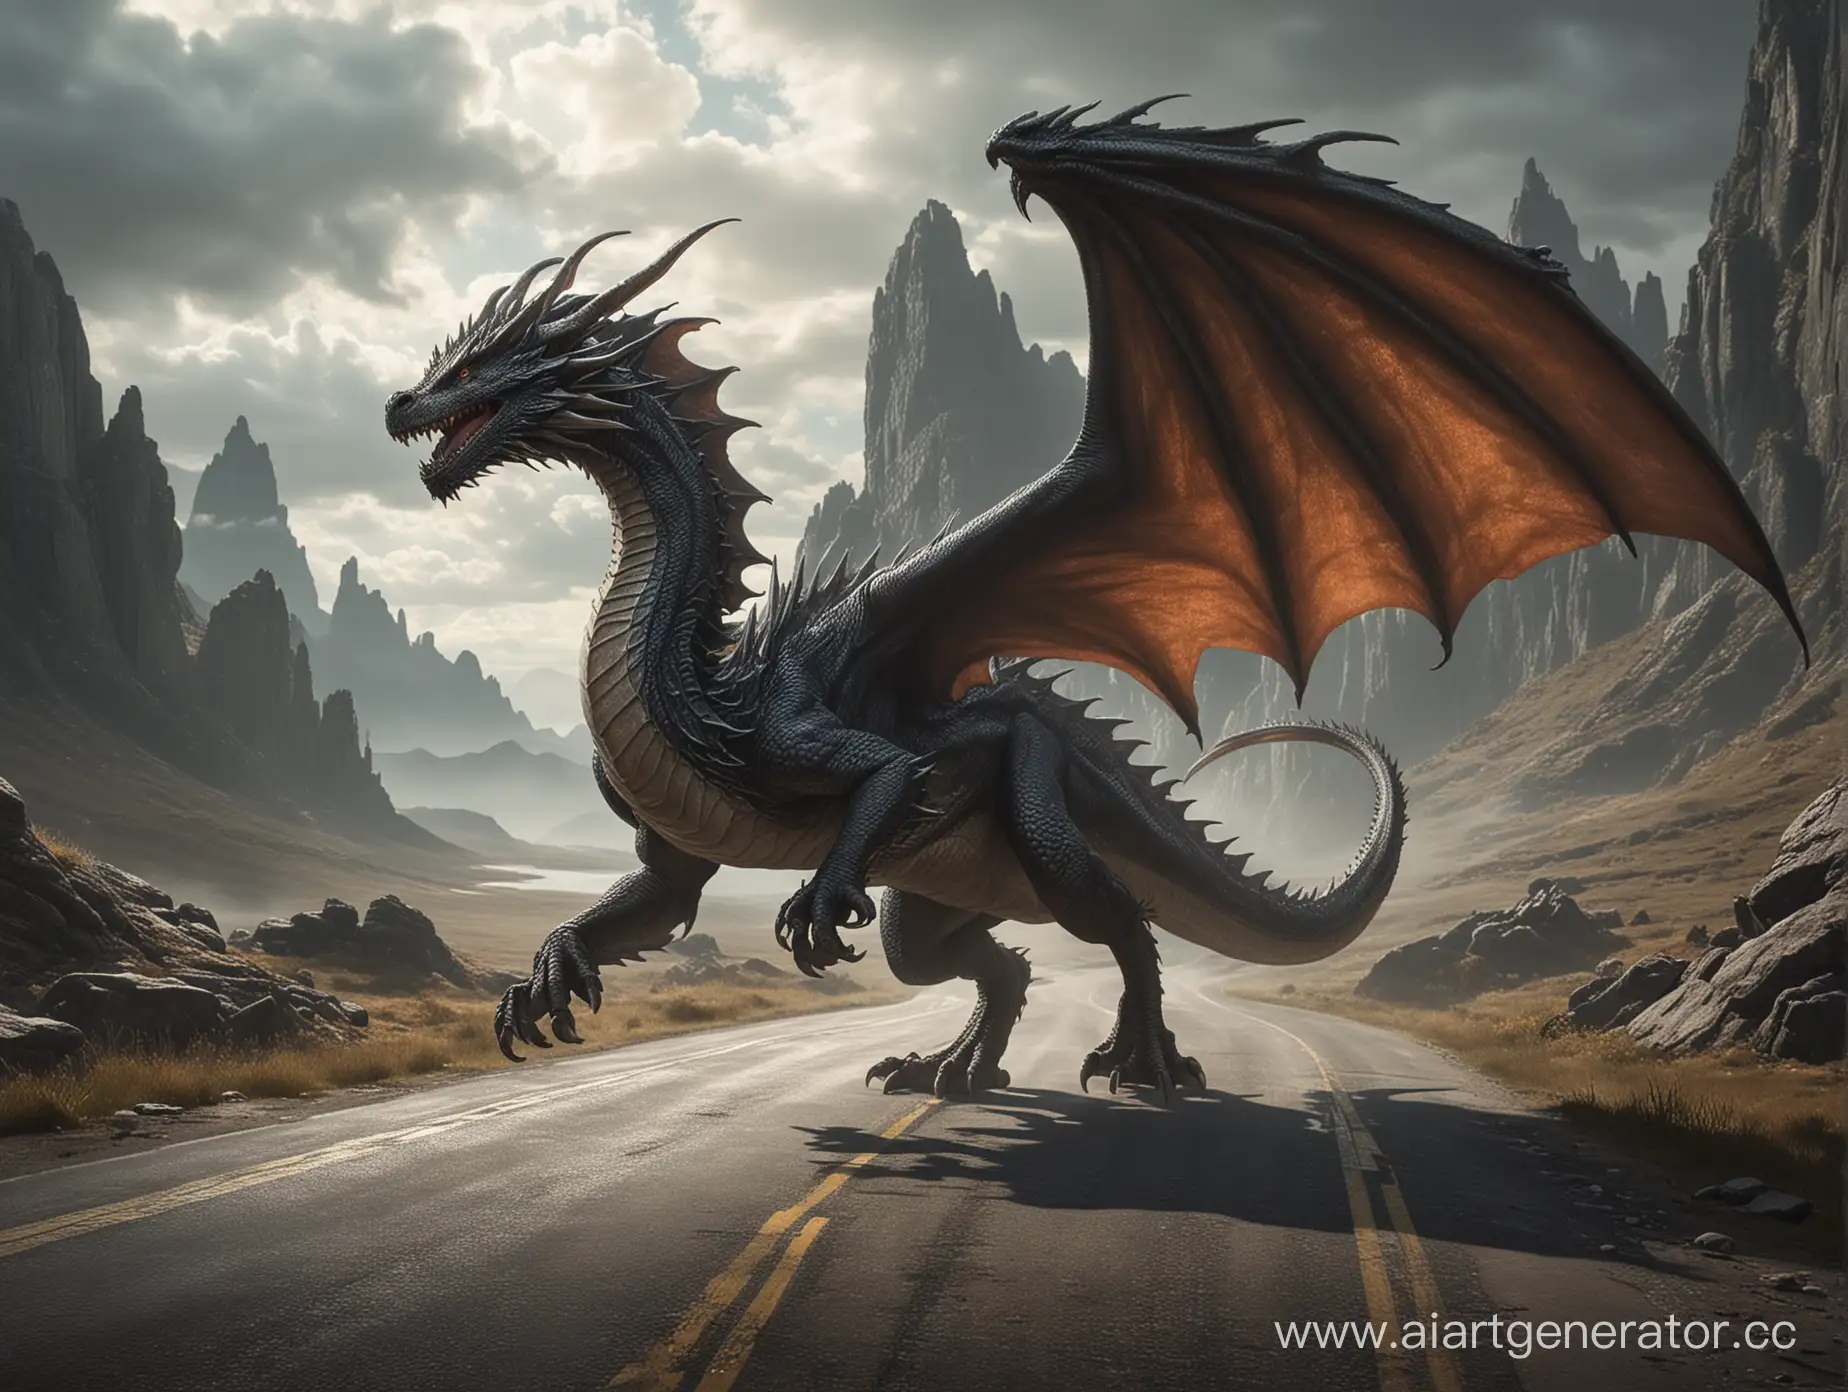 Fantasy-Adventure-Beginning-of-the-Journey-with-a-Dragon